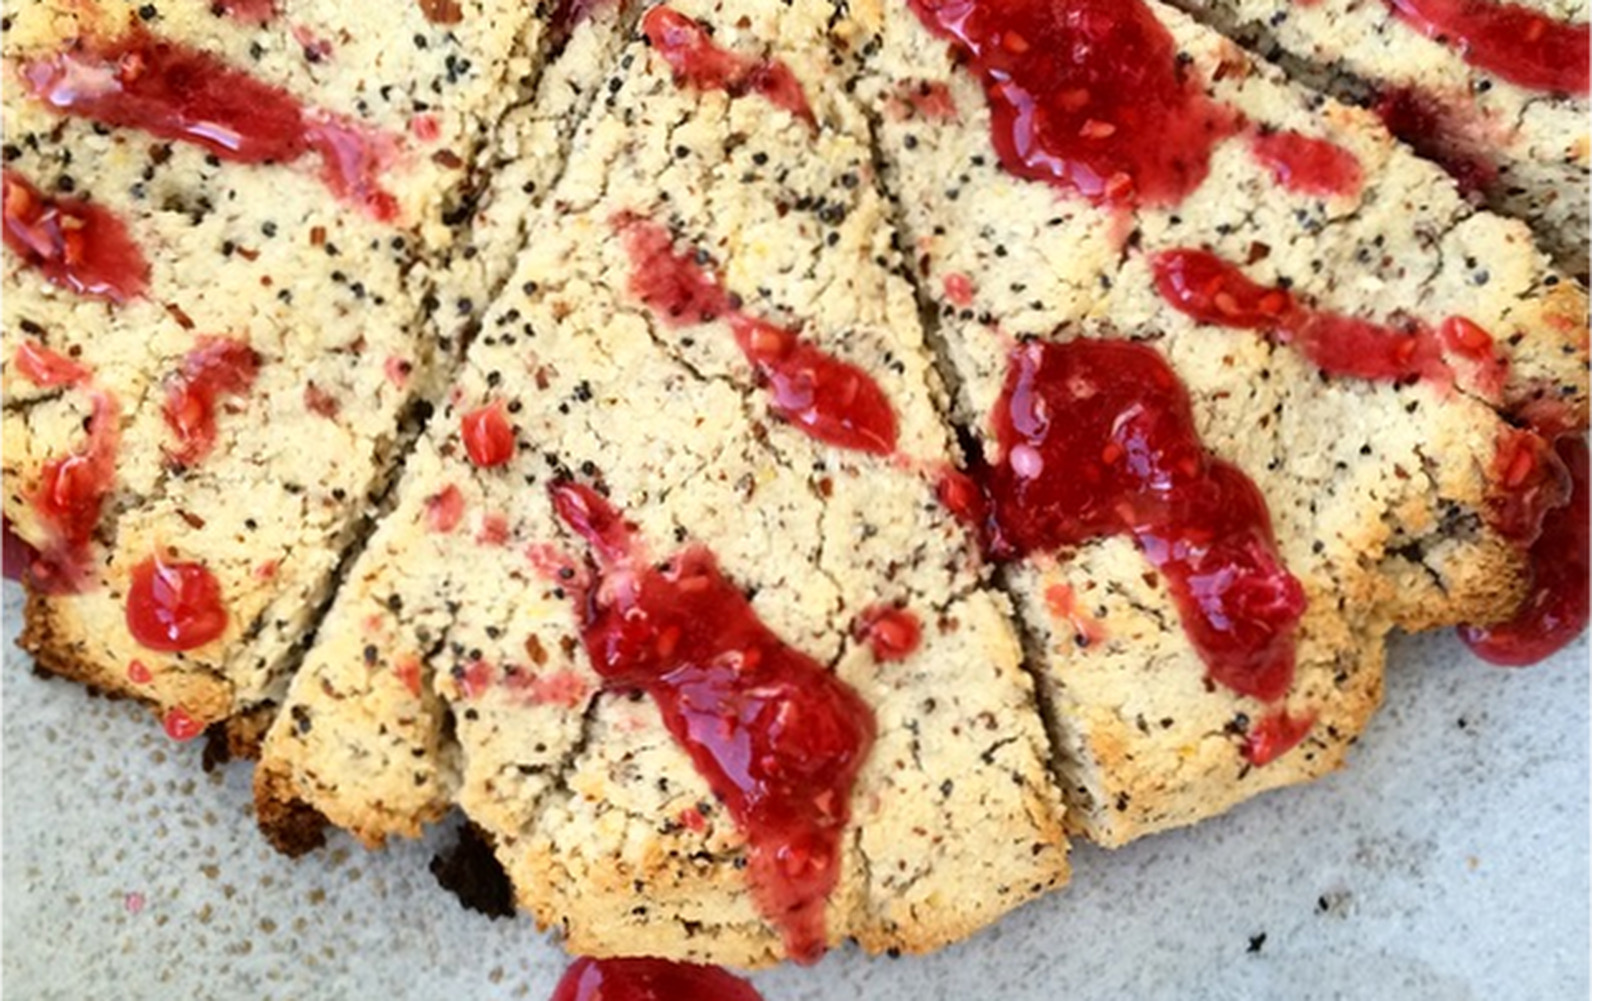 Lemon and poppy seed scones with a raspberry and lavender glaze